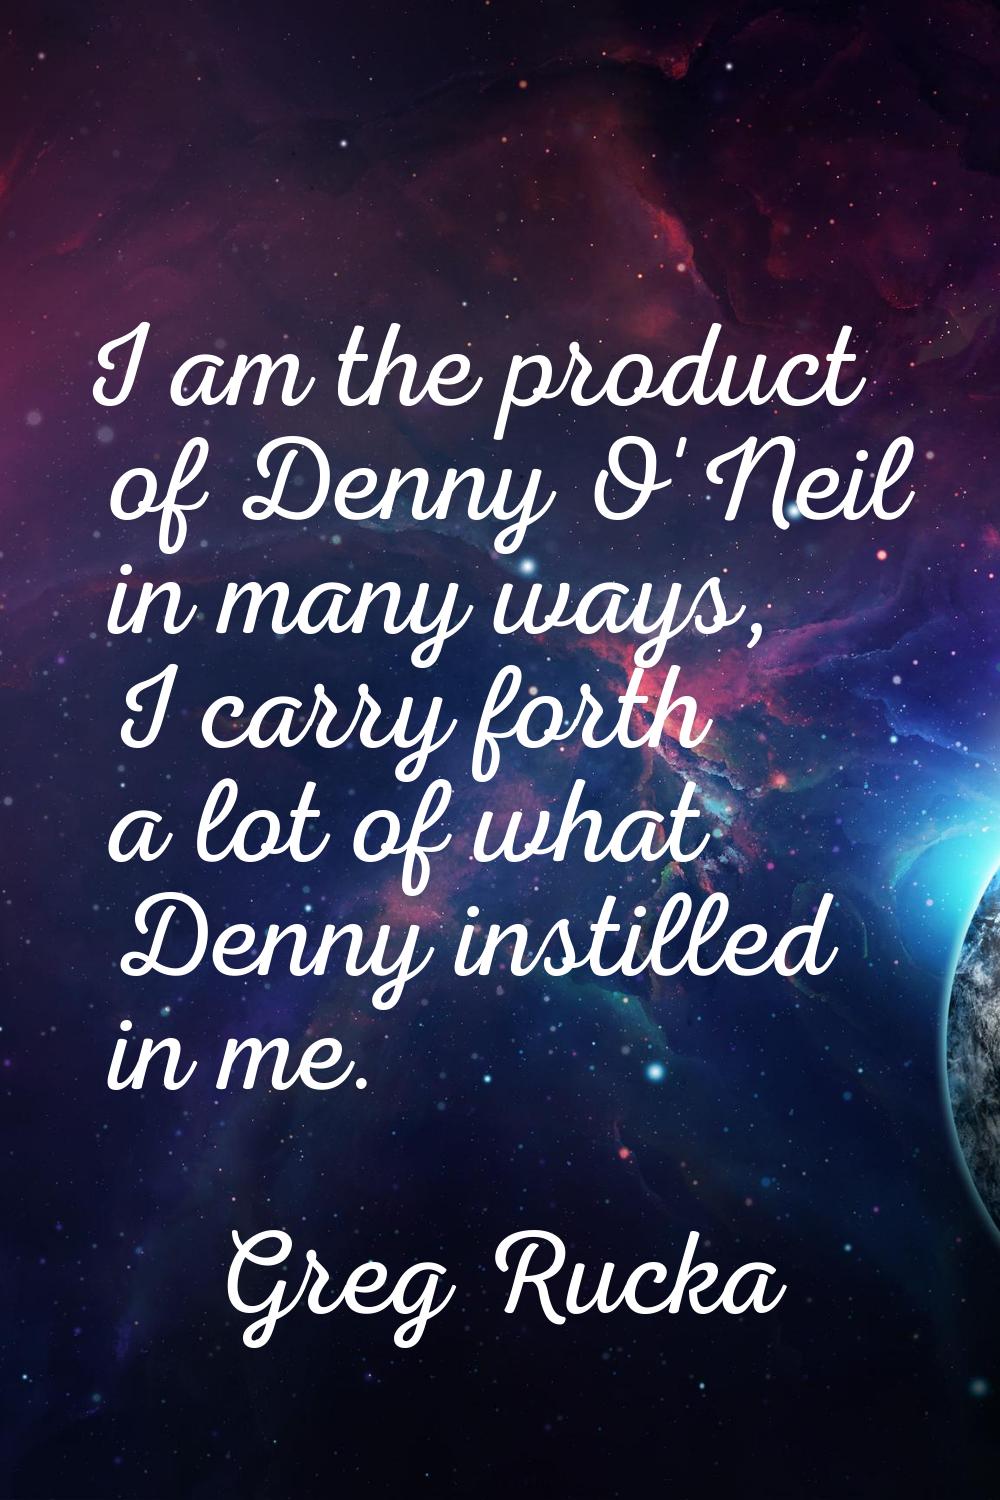 I am the product of Denny O'Neil in many ways, I carry forth a lot of what Denny instilled in me.